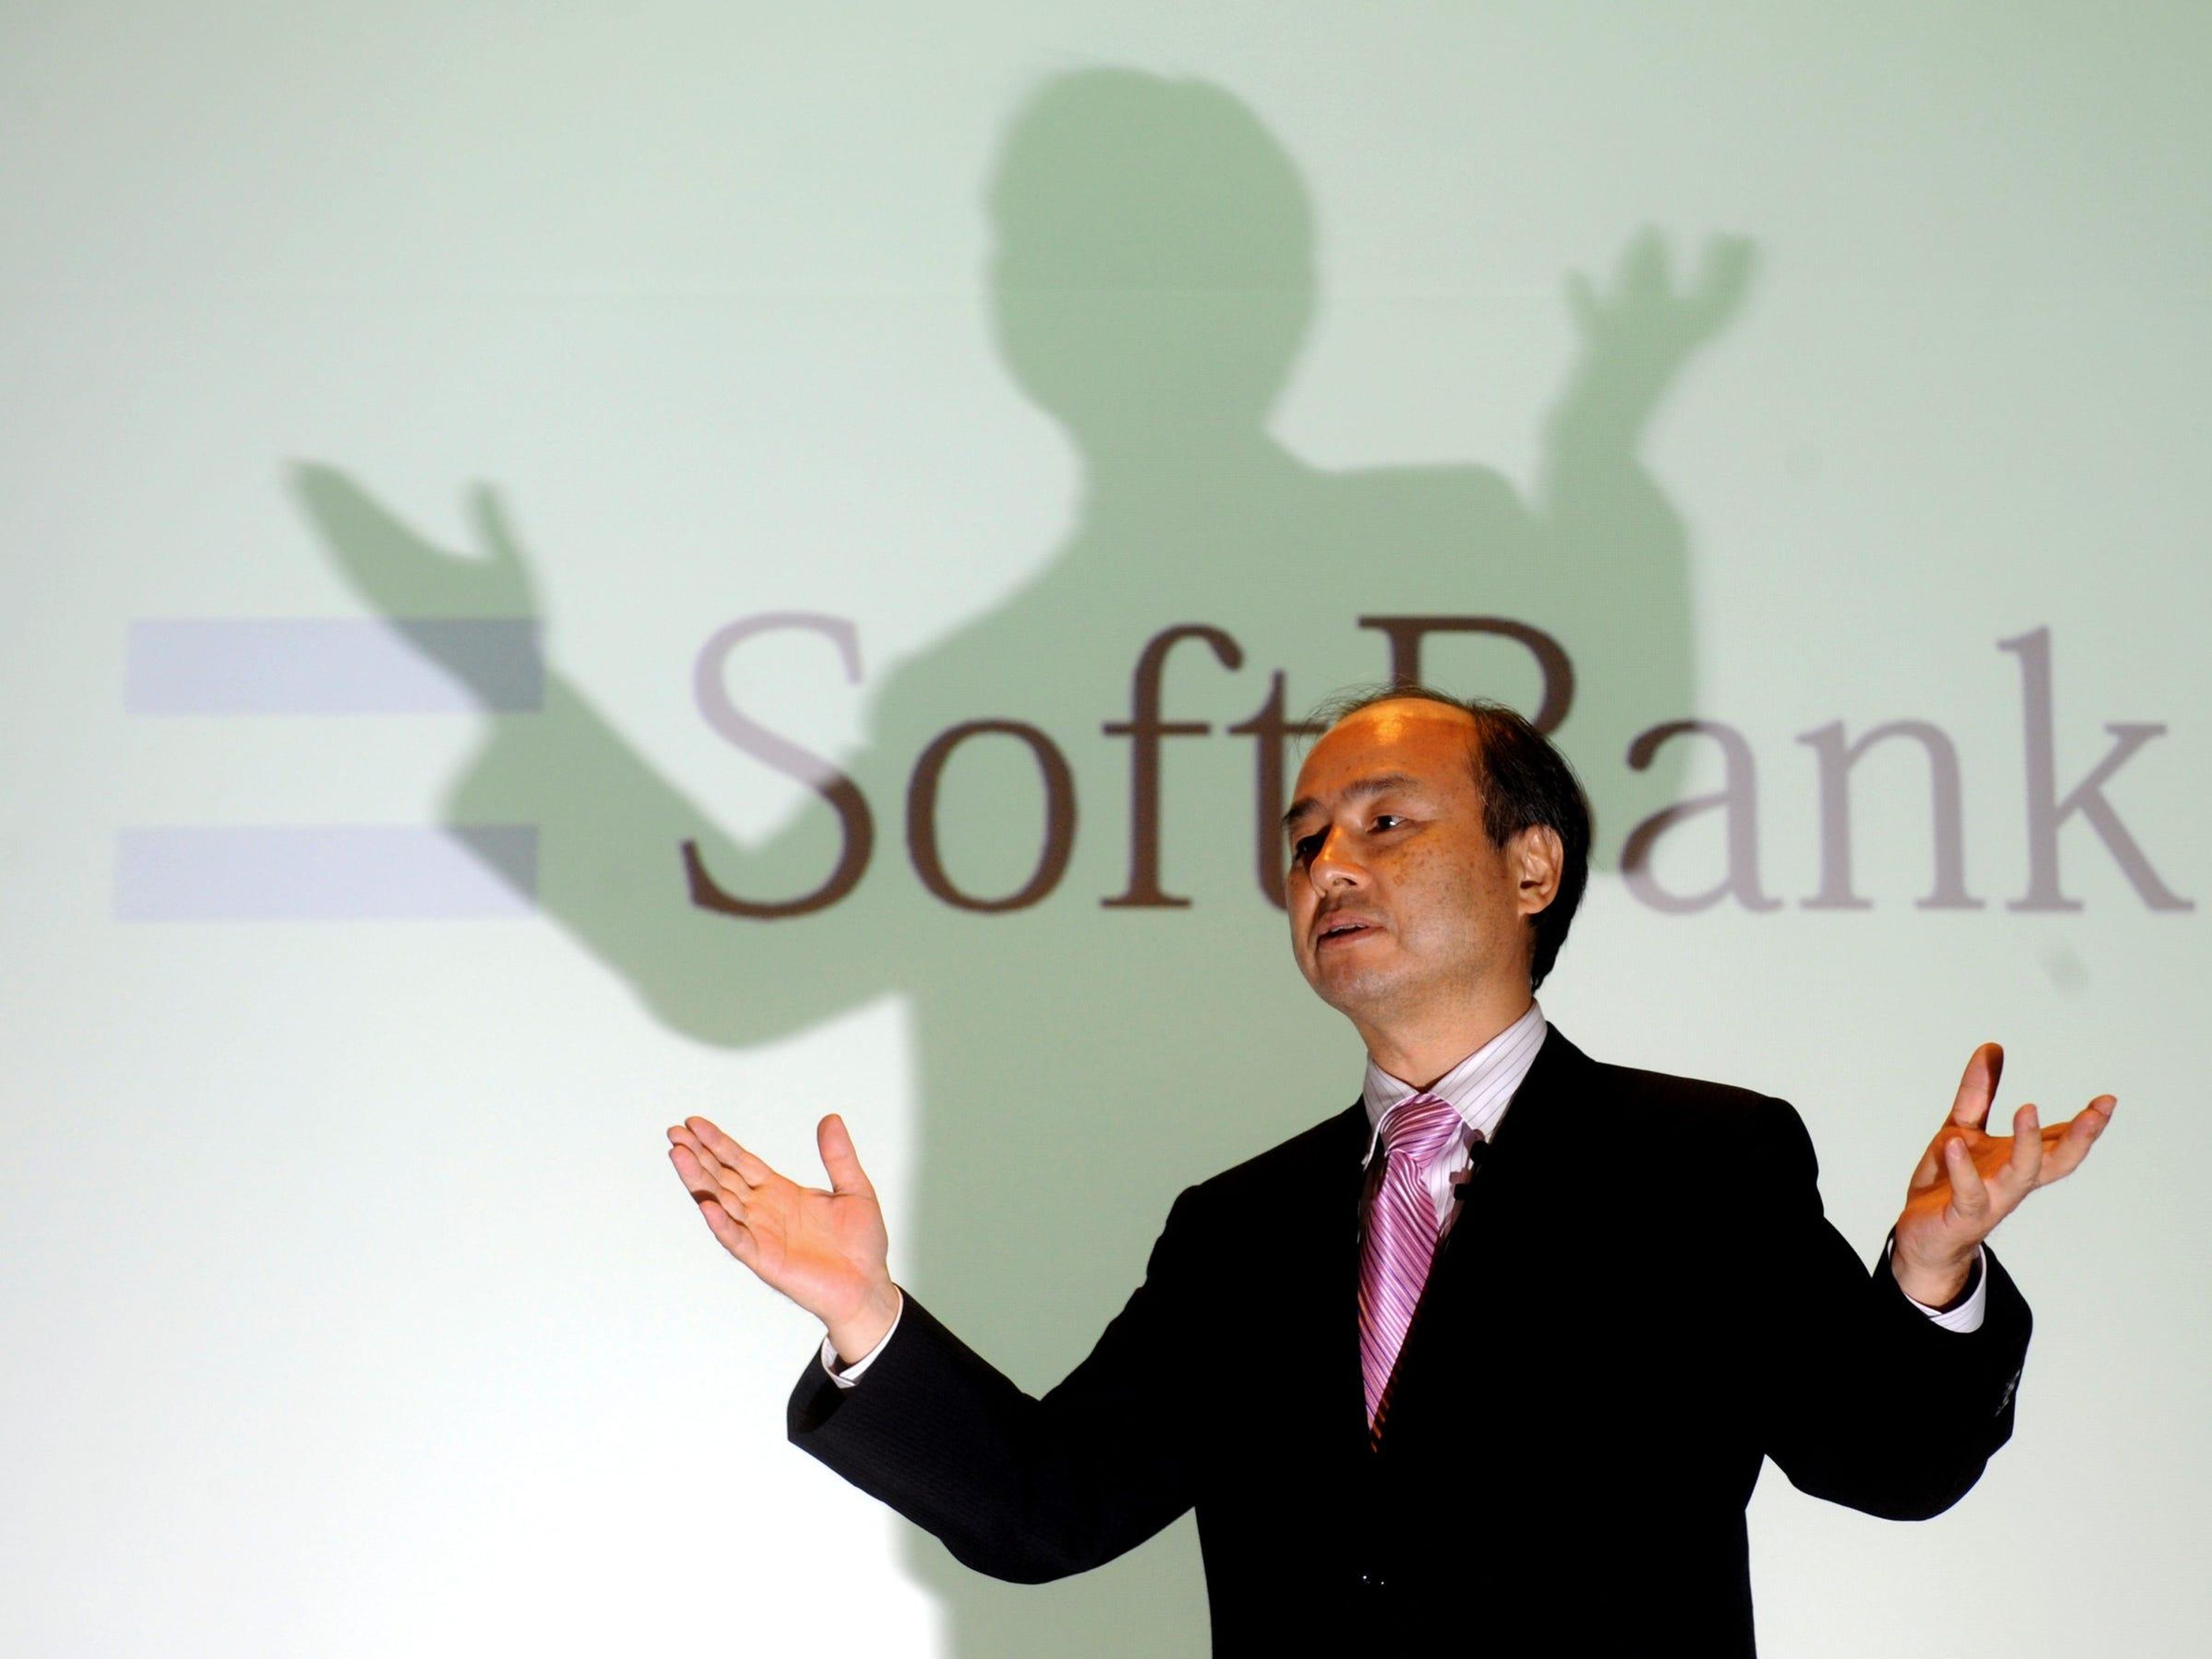 Masayoshi Son, the chief of Japanese Internet and telecom giant Softbank, delivers a speech during a press conference in Seoul on June 20, 2011.